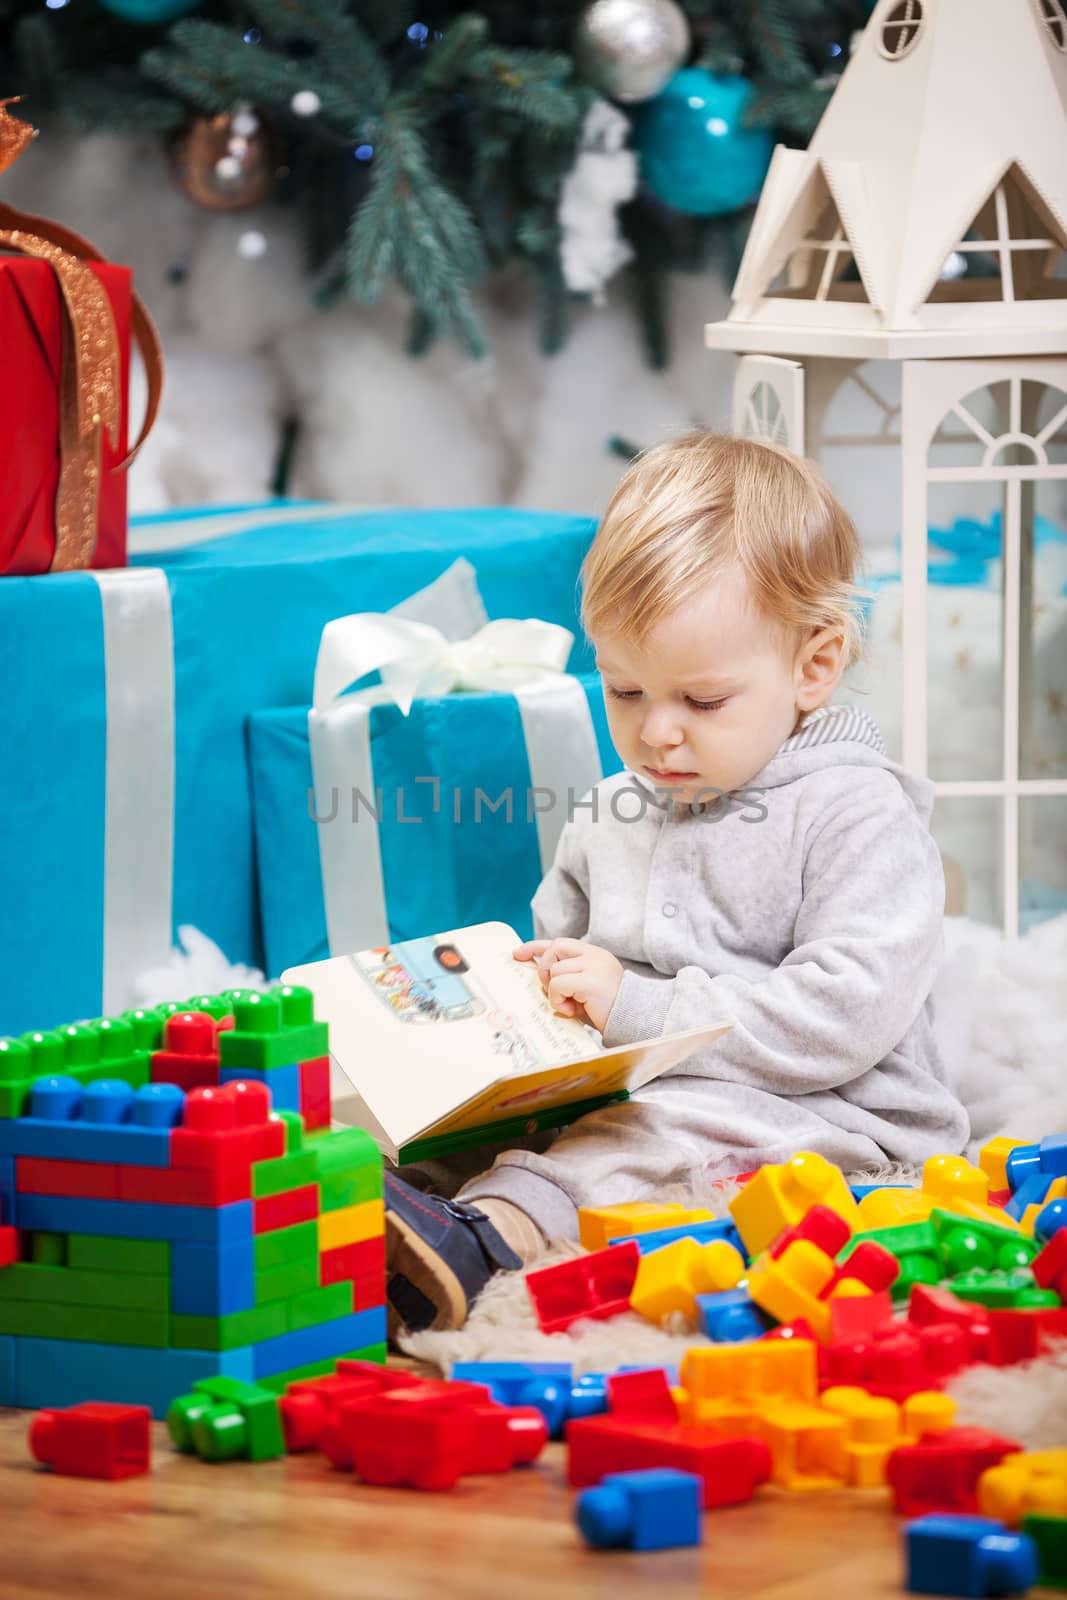 Cute boy sitting at Christmas tree with a book by photobac